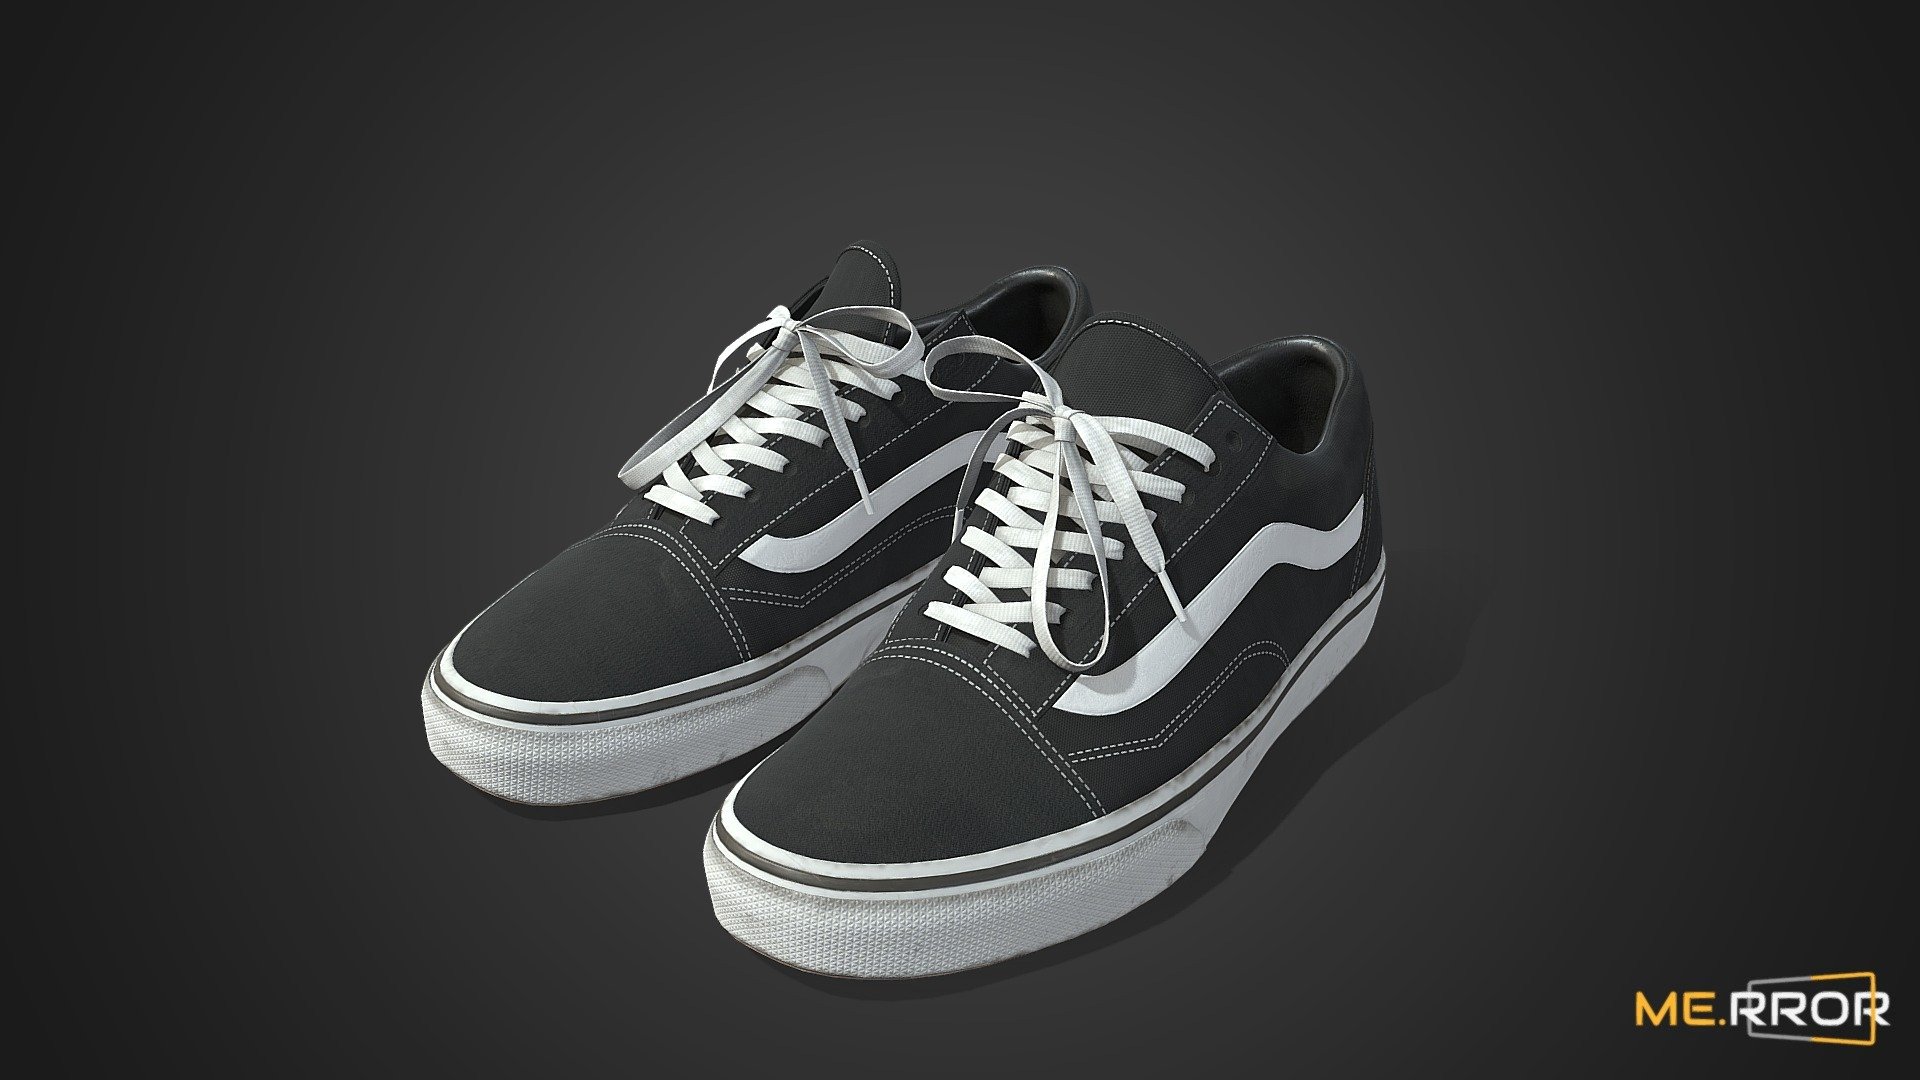 MERROR is a 3D Content PLATFORM which introduces various Asian assets to the 3D world


3DScanning #Photogrametry #ME.RROR - [Game-Ready] White Line Black Sneakers - Buy Royalty Free 3D model by ME.RROR Studio (@merror) 3d model